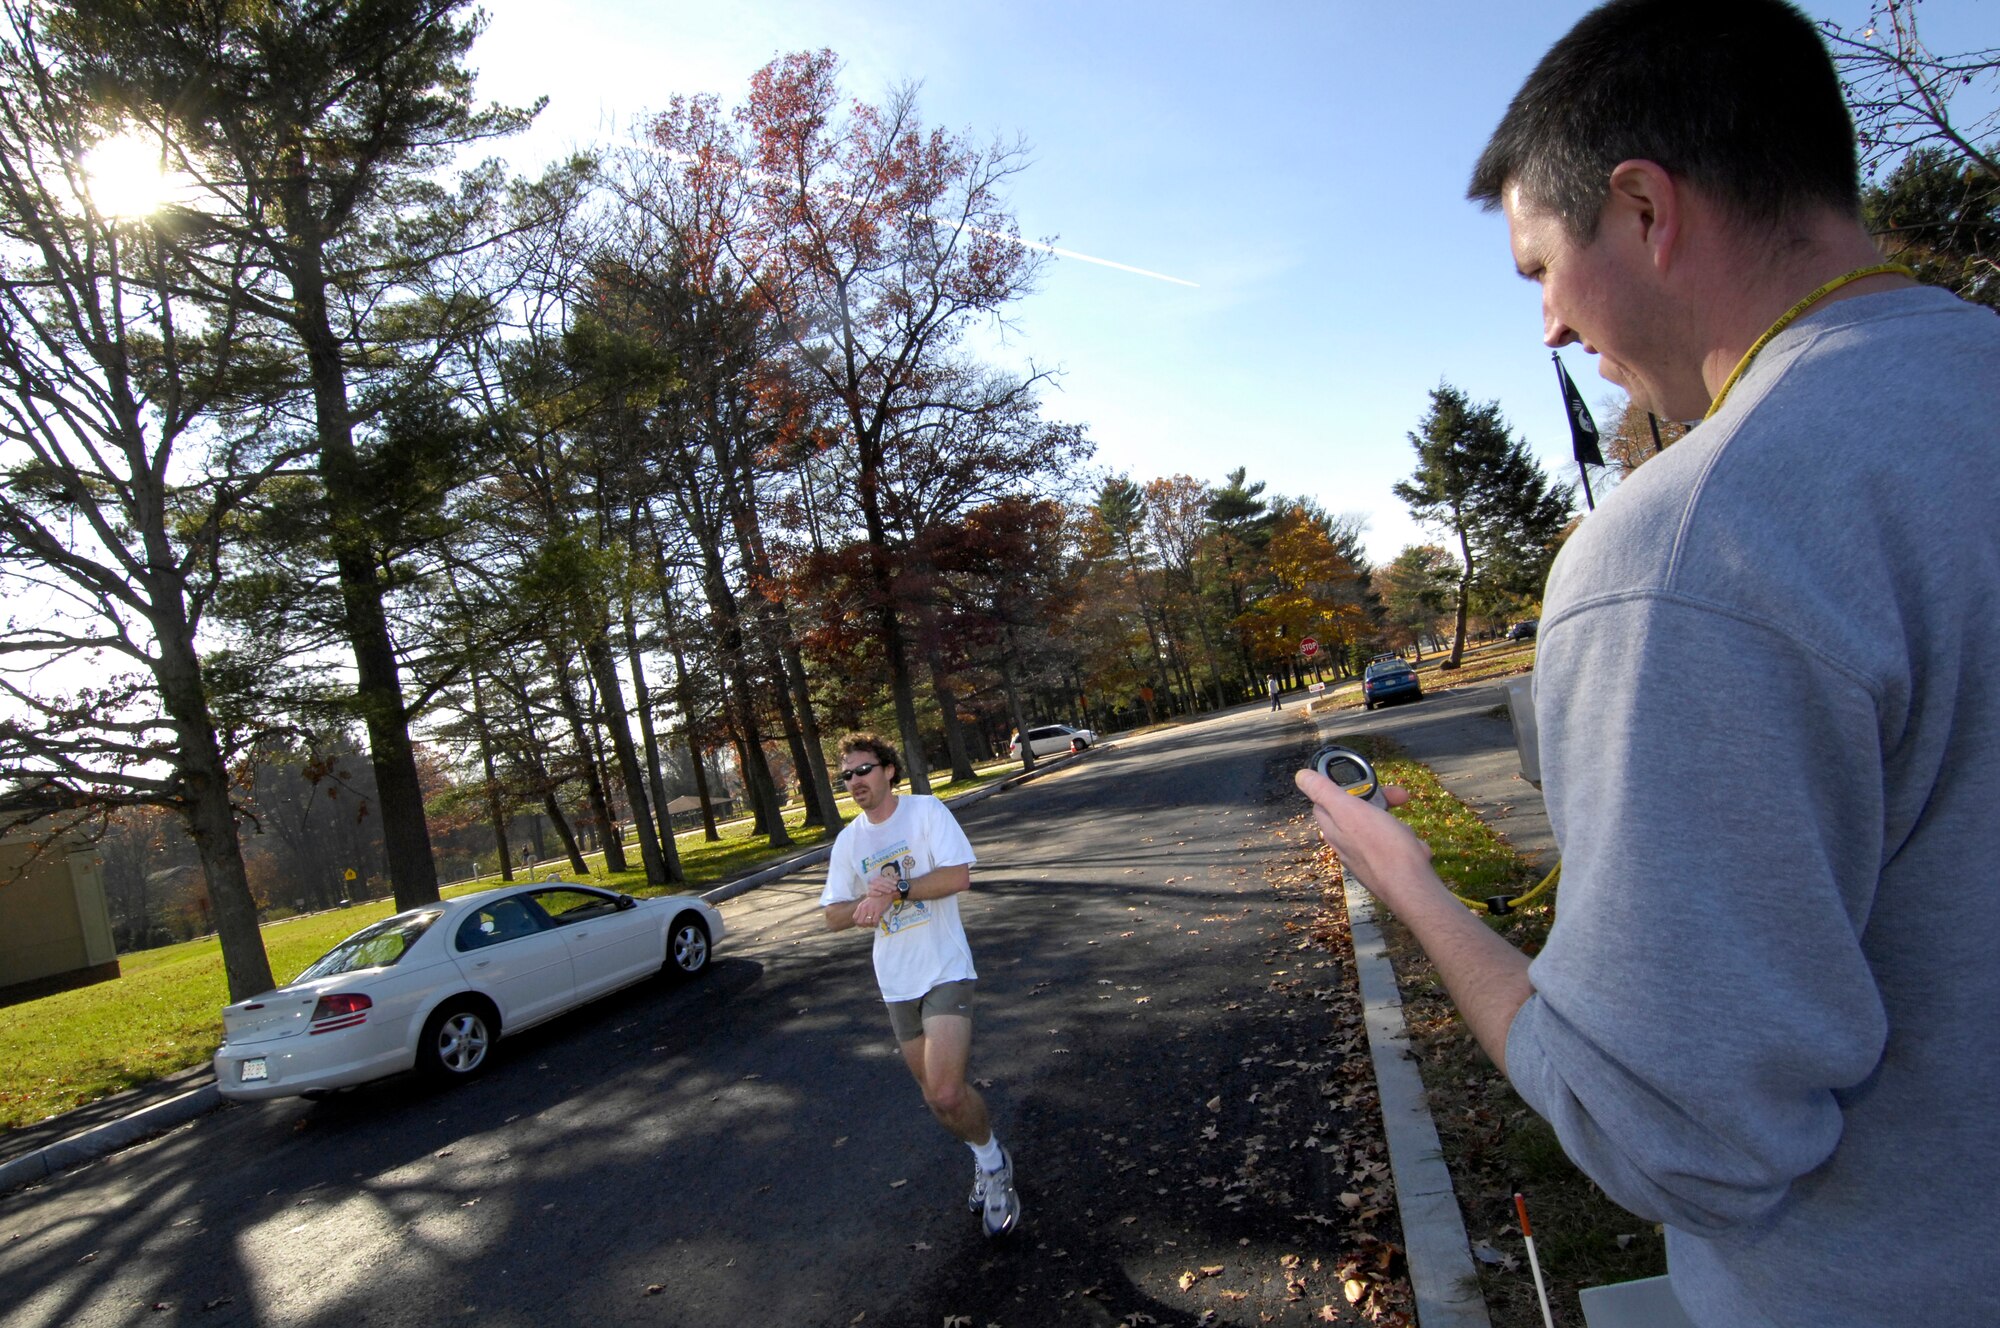 HANSCOM AFB, Mass. – Hanscom runners enjoy the sunny autumn weather while participating in the Fitness and Sports Center’s Pilgrim’s Parade Fun Run Nov. 14. In the male category, Erik Duerr, MIT Lincoln Lab, placed first with a time of 18:52. Joe Fischetti, MIT Lincoln Lab, and Capt. David Jarvis, 652nd Electronic Systems Squadron, followed with the times 19:13 and 21:11 respectively. Susan Miller, 652 ELSS, finished with a time of 28:20 in the female category. For more information on upcoming Fitness and Sports Center events and classes, visit www.hanscomservices.com/FitnessandSportsCenter.html. (U.S. Air Force photos by Mark Wyatt.) 

